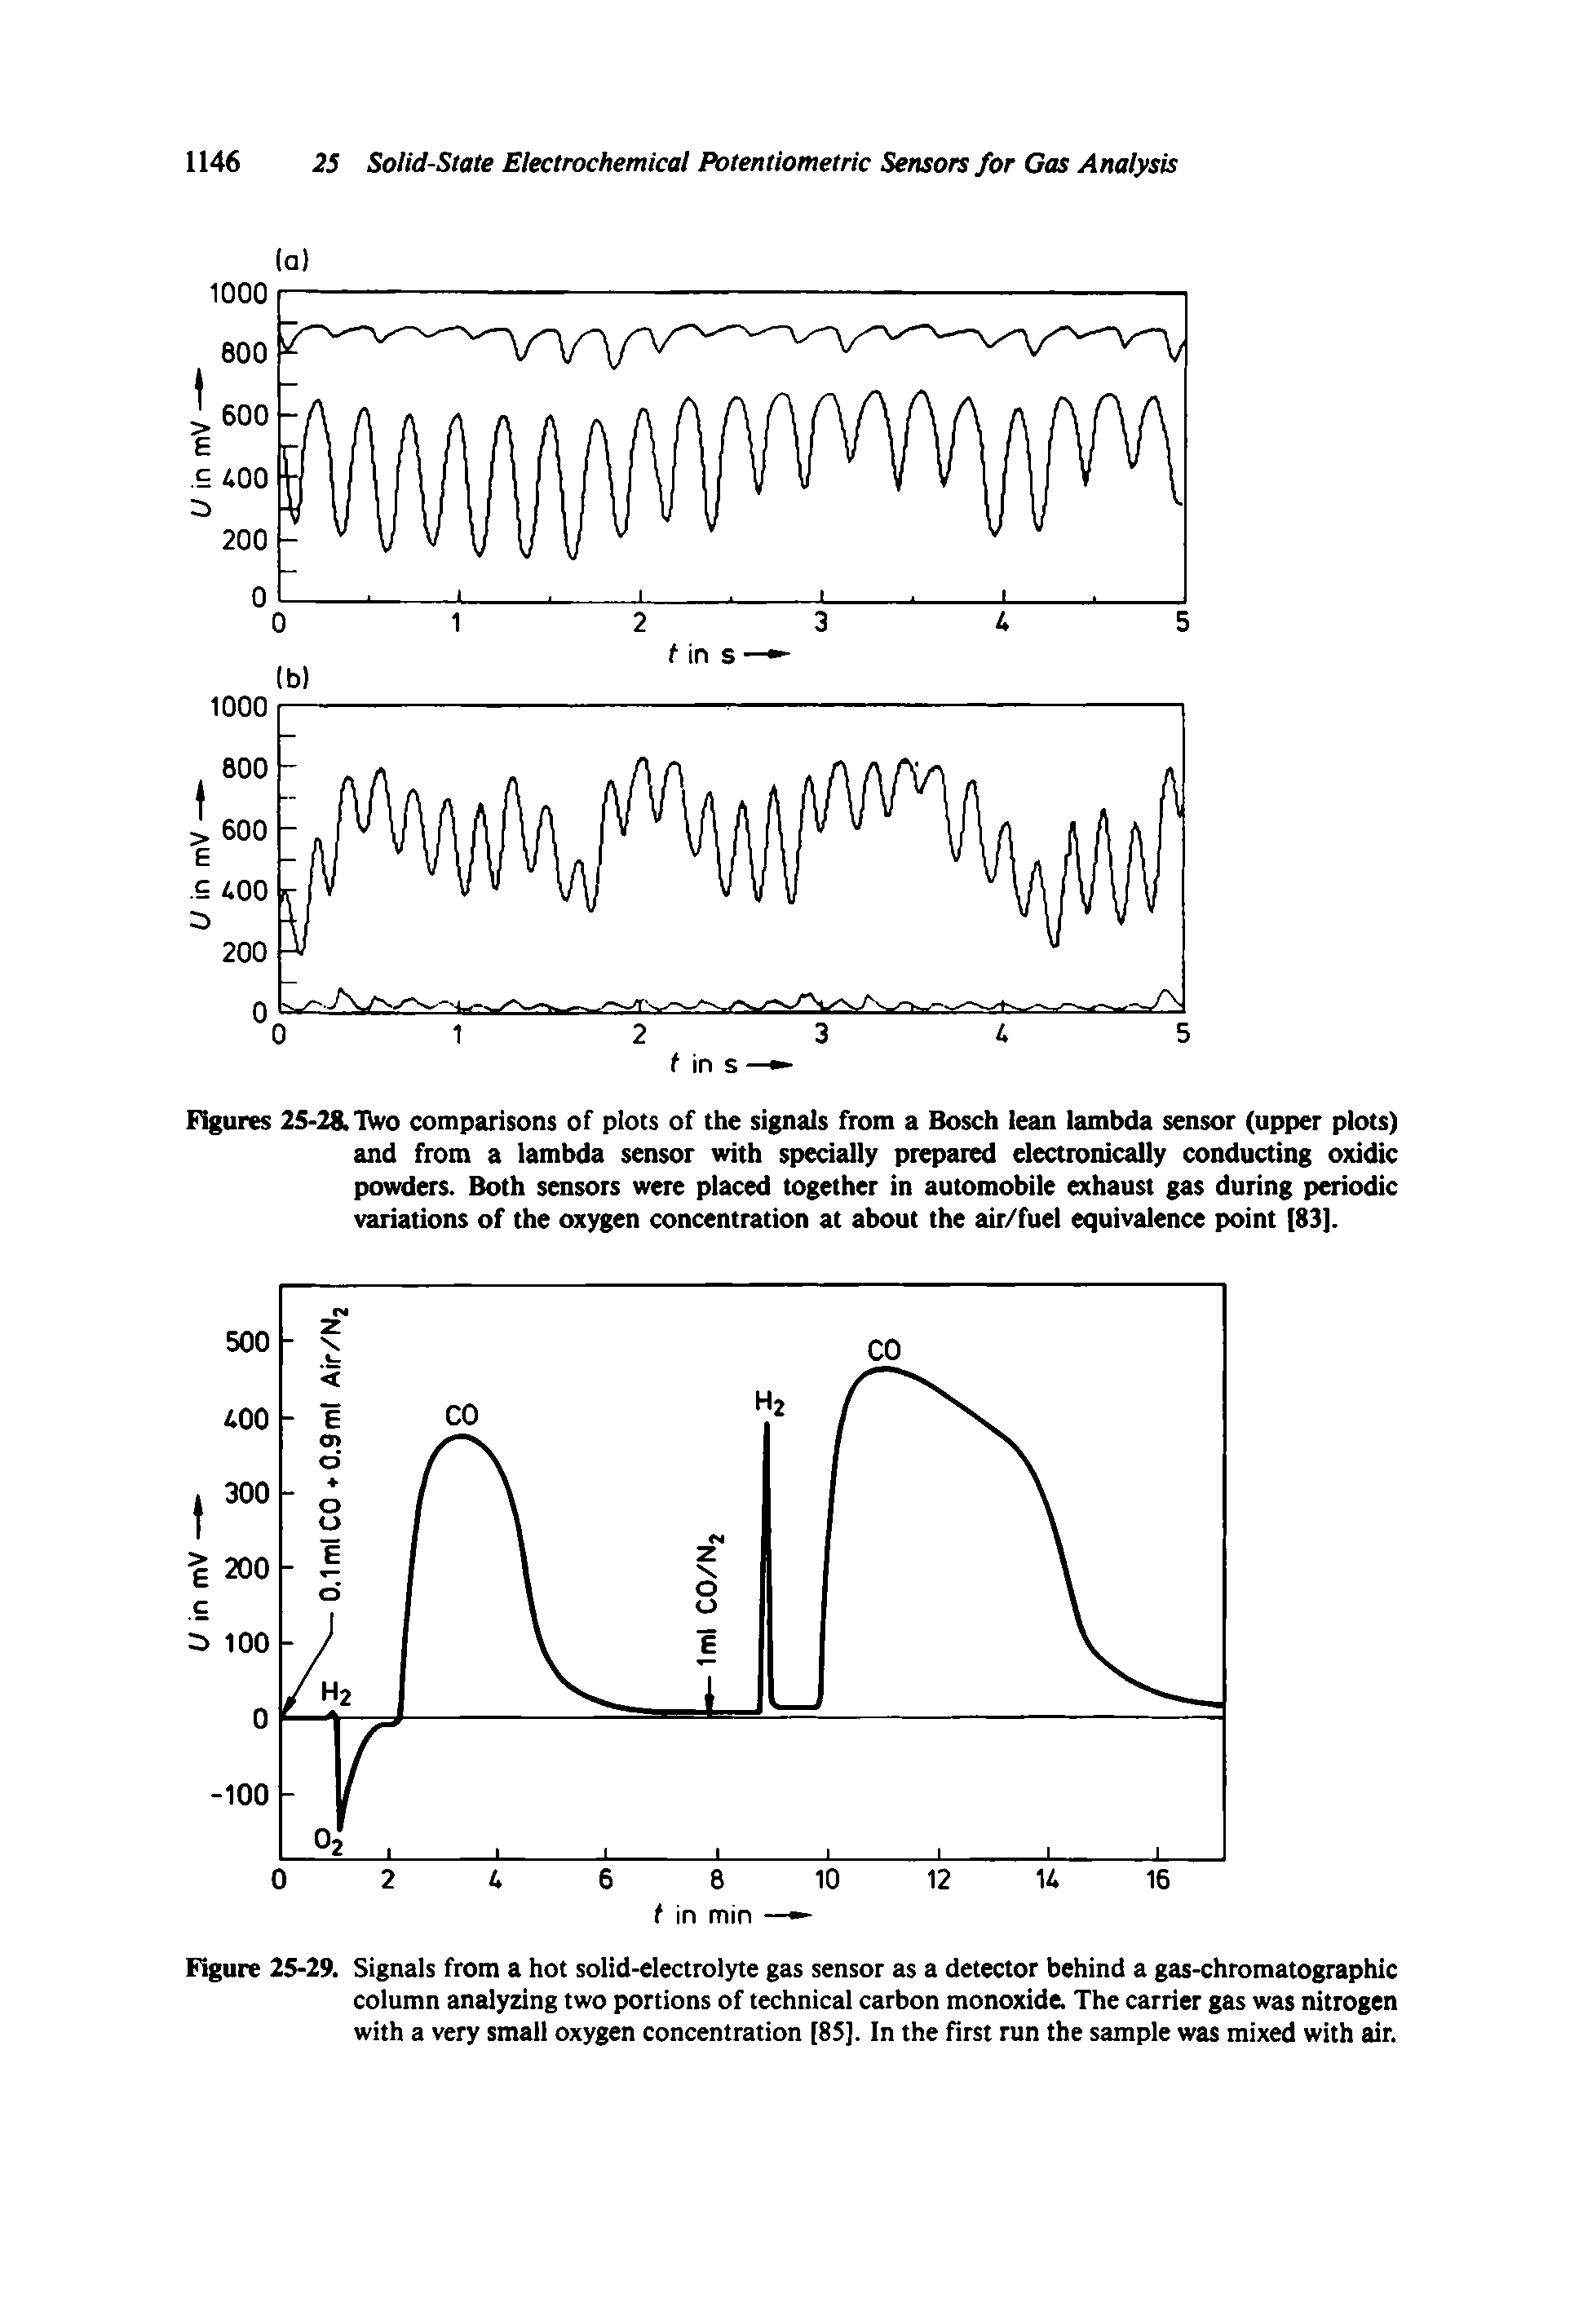 Figure 25-29. Signals from a hot solid-electrolyte gas sensor as a detector behind a gas-chromatographic column analyzing two portions of technical carbon monoxide. The carrier gas was nitrogen with a very small oxygen concentration [85]. In the first run the sample was mixed with air.